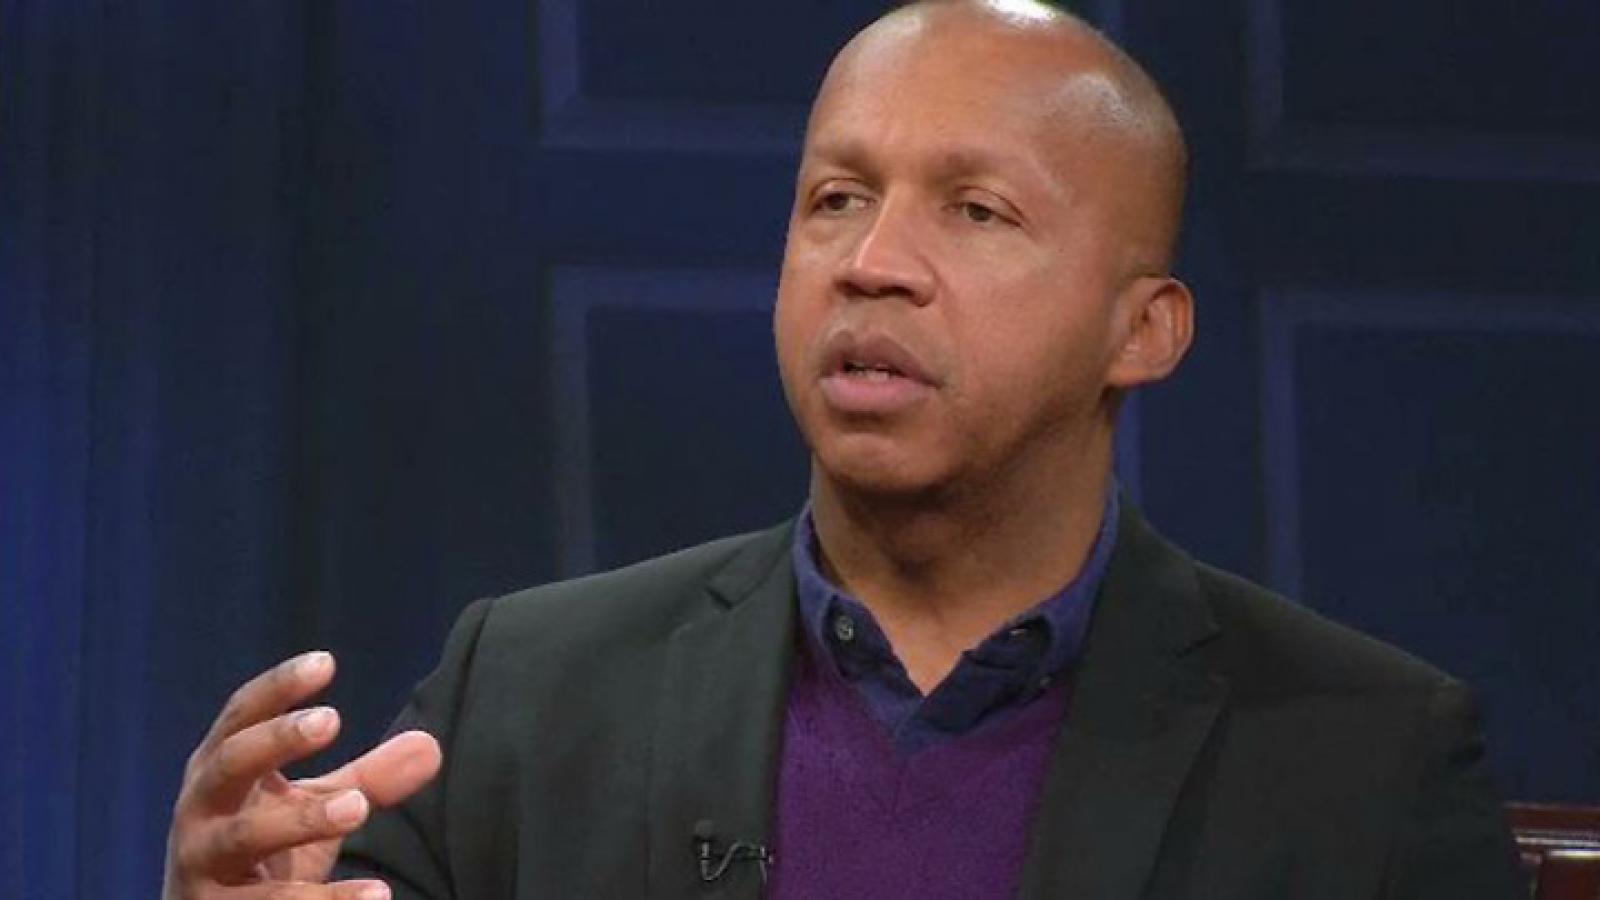 Bryan Stevenson discusses the ongoing quest for equal justice before the law